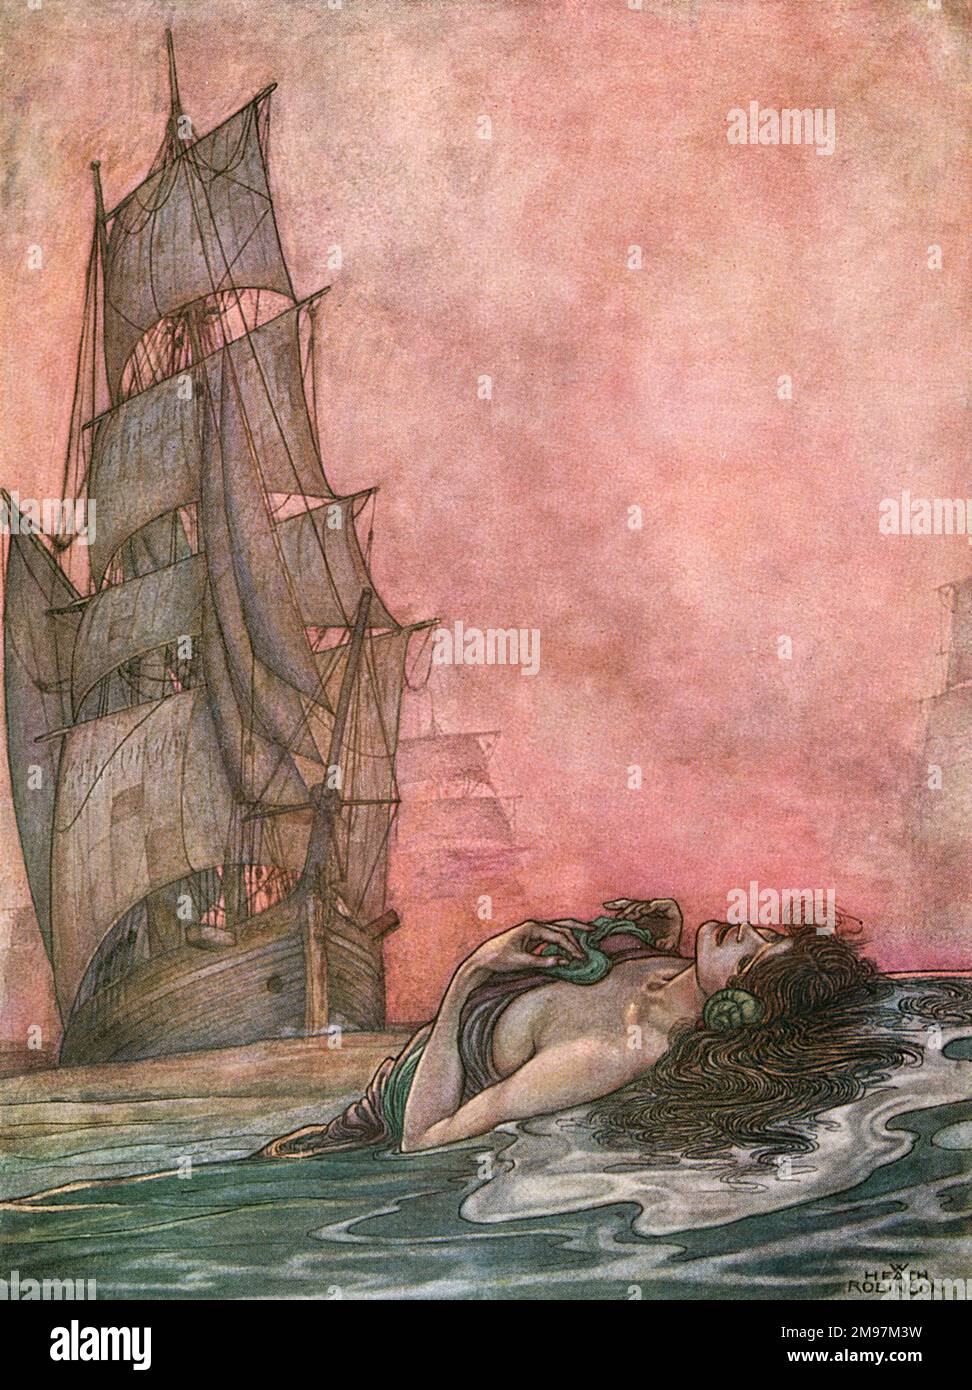 Illustration to A Song of the English, a patriotic set of poems by Rudyard Kipling (first published in the English Illustrated Magazine). She Calls Us, Still Unfed, depicting a sailing ship on the sea, with an allegorical female figure floating in the foreground, referring to the many English sailors lost at sea over hundreds of years. Stock Photo